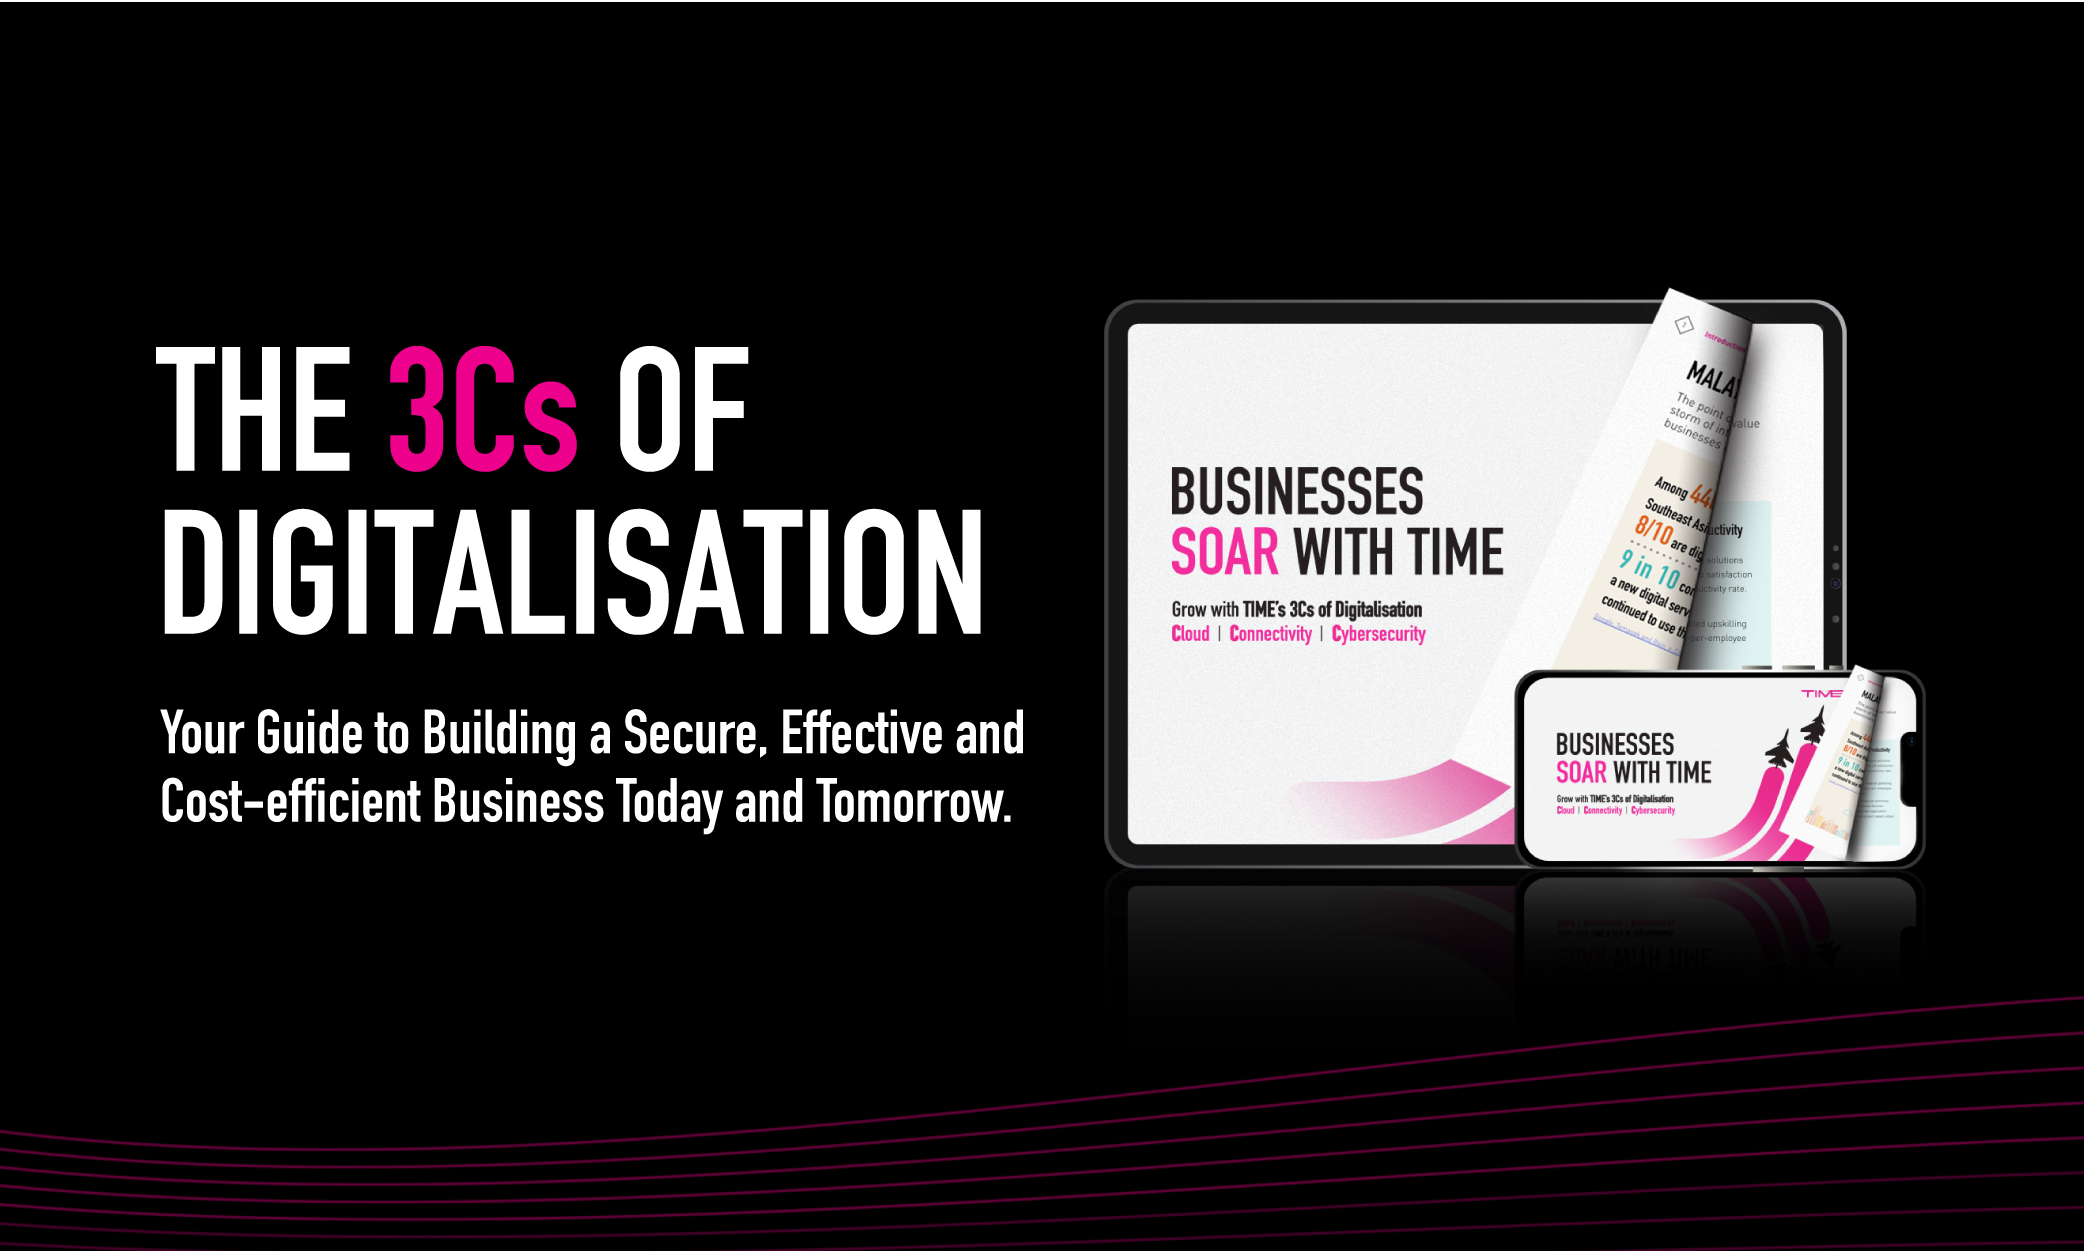 Future-proof your business with TIME’s 3Cs of digitalisation